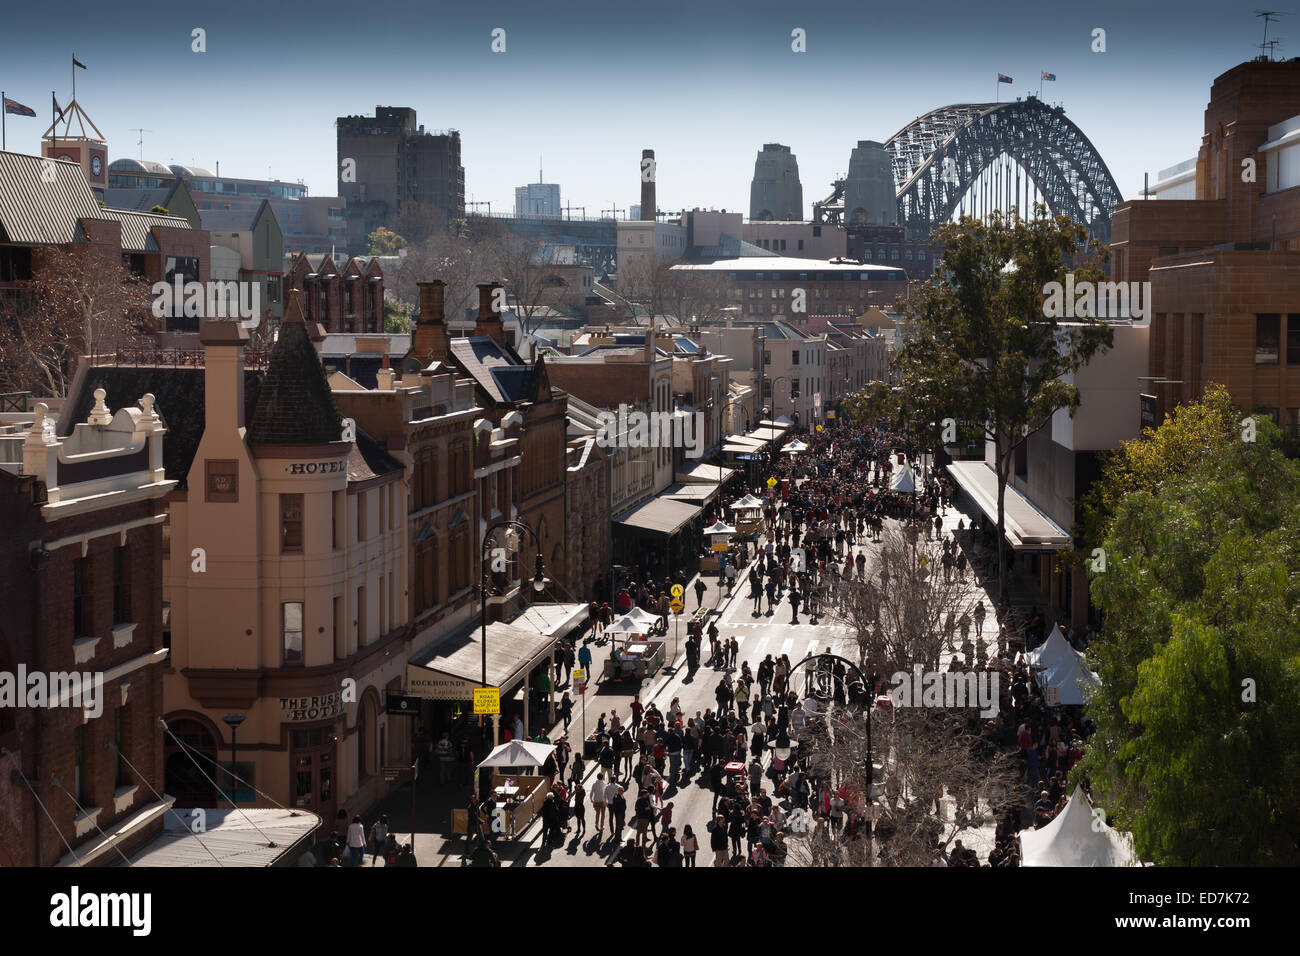 Pedestrians on George Street during the annual festival held in The Rocks Sydney Australia Stock Photo